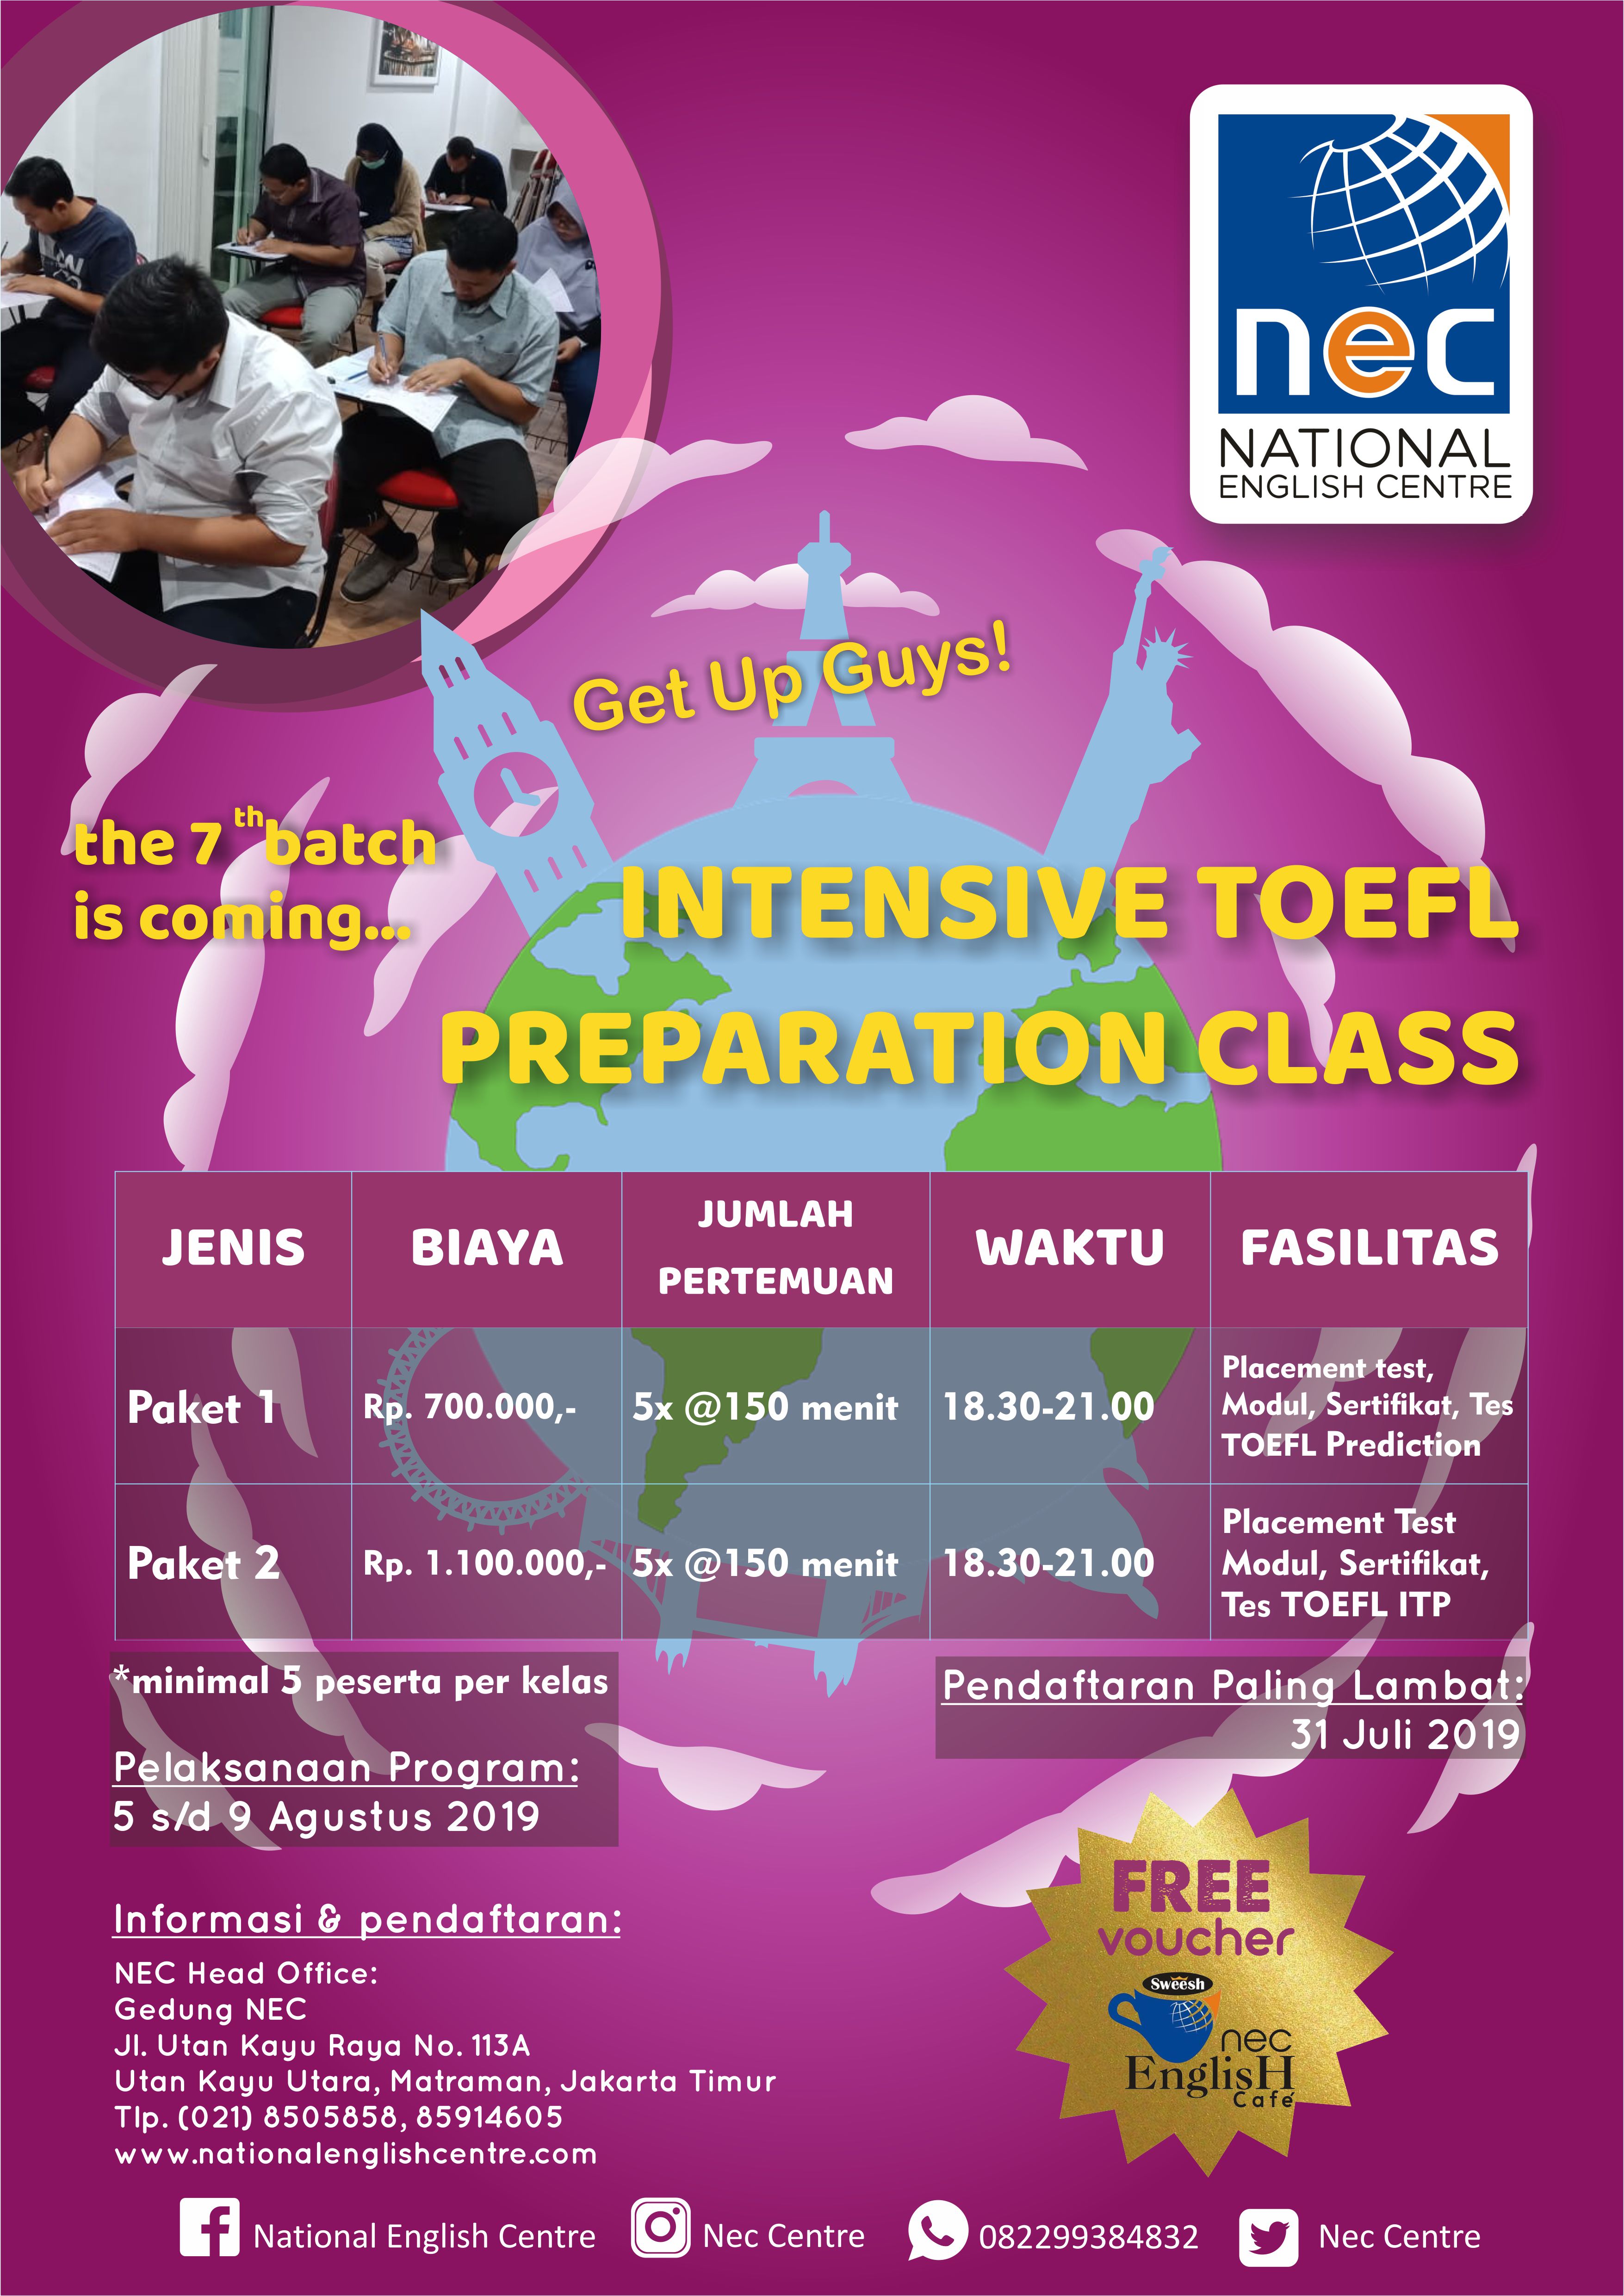 You are currently viewing Intensive TOEFL Preparation Class batch 7